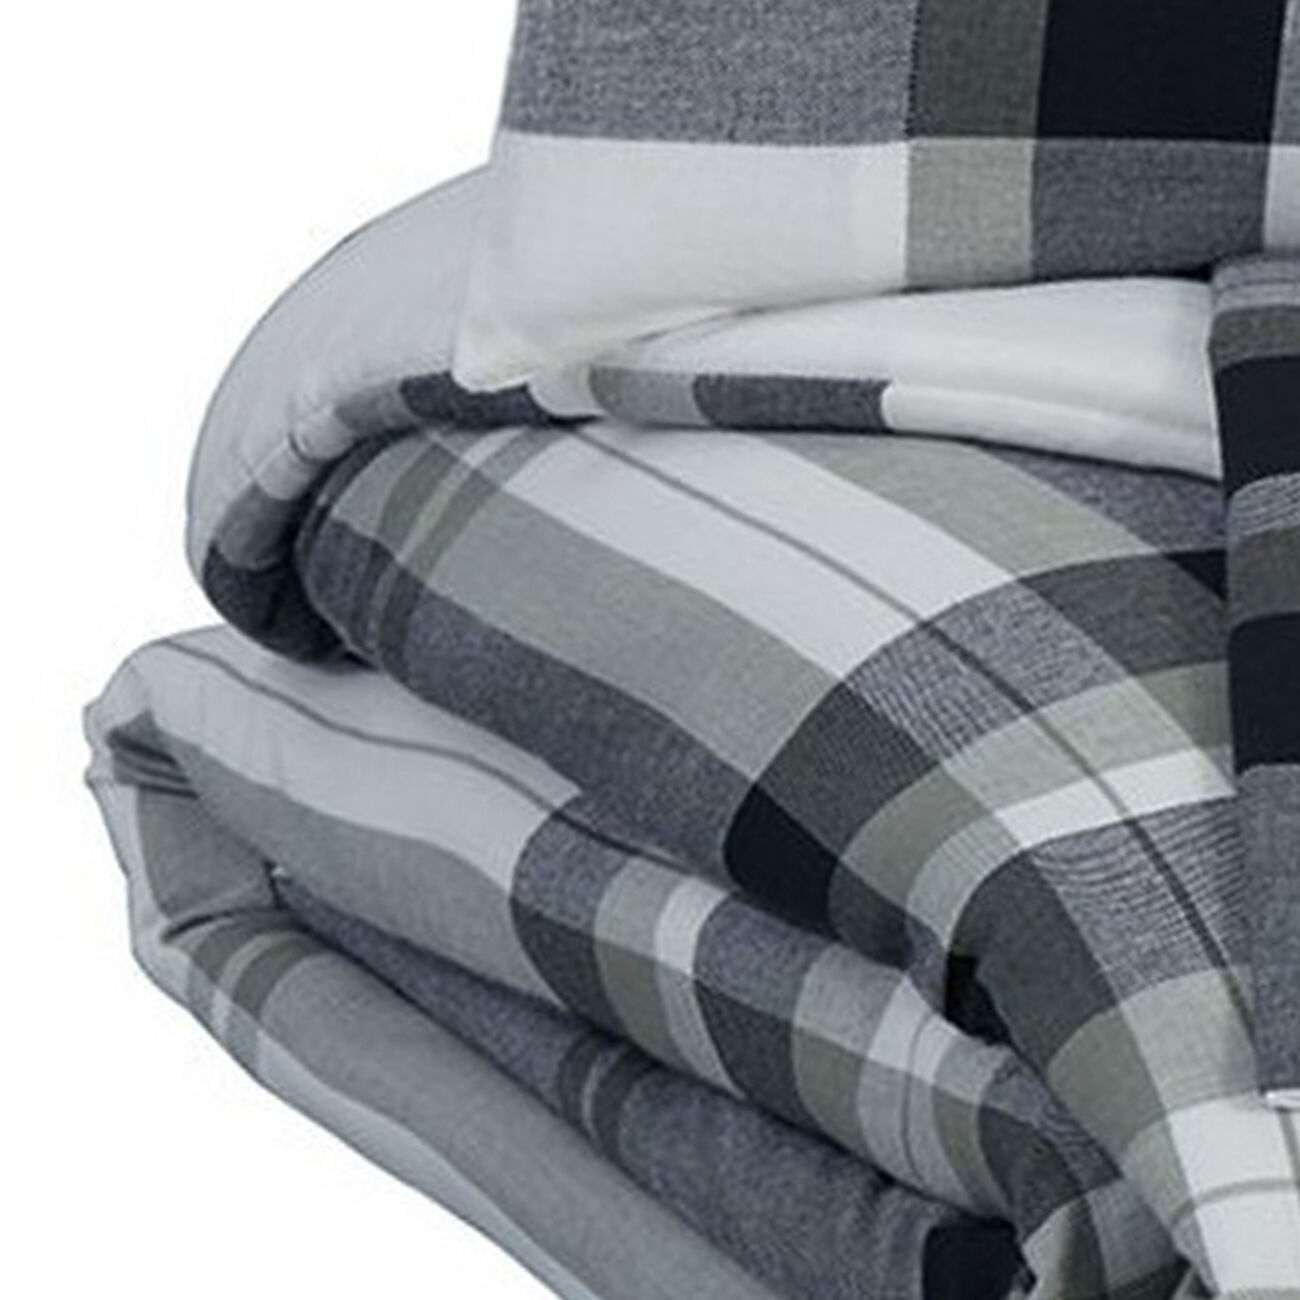 3 Piece Fabric King Comforter Set with Plaid Pattern, Black and Gray